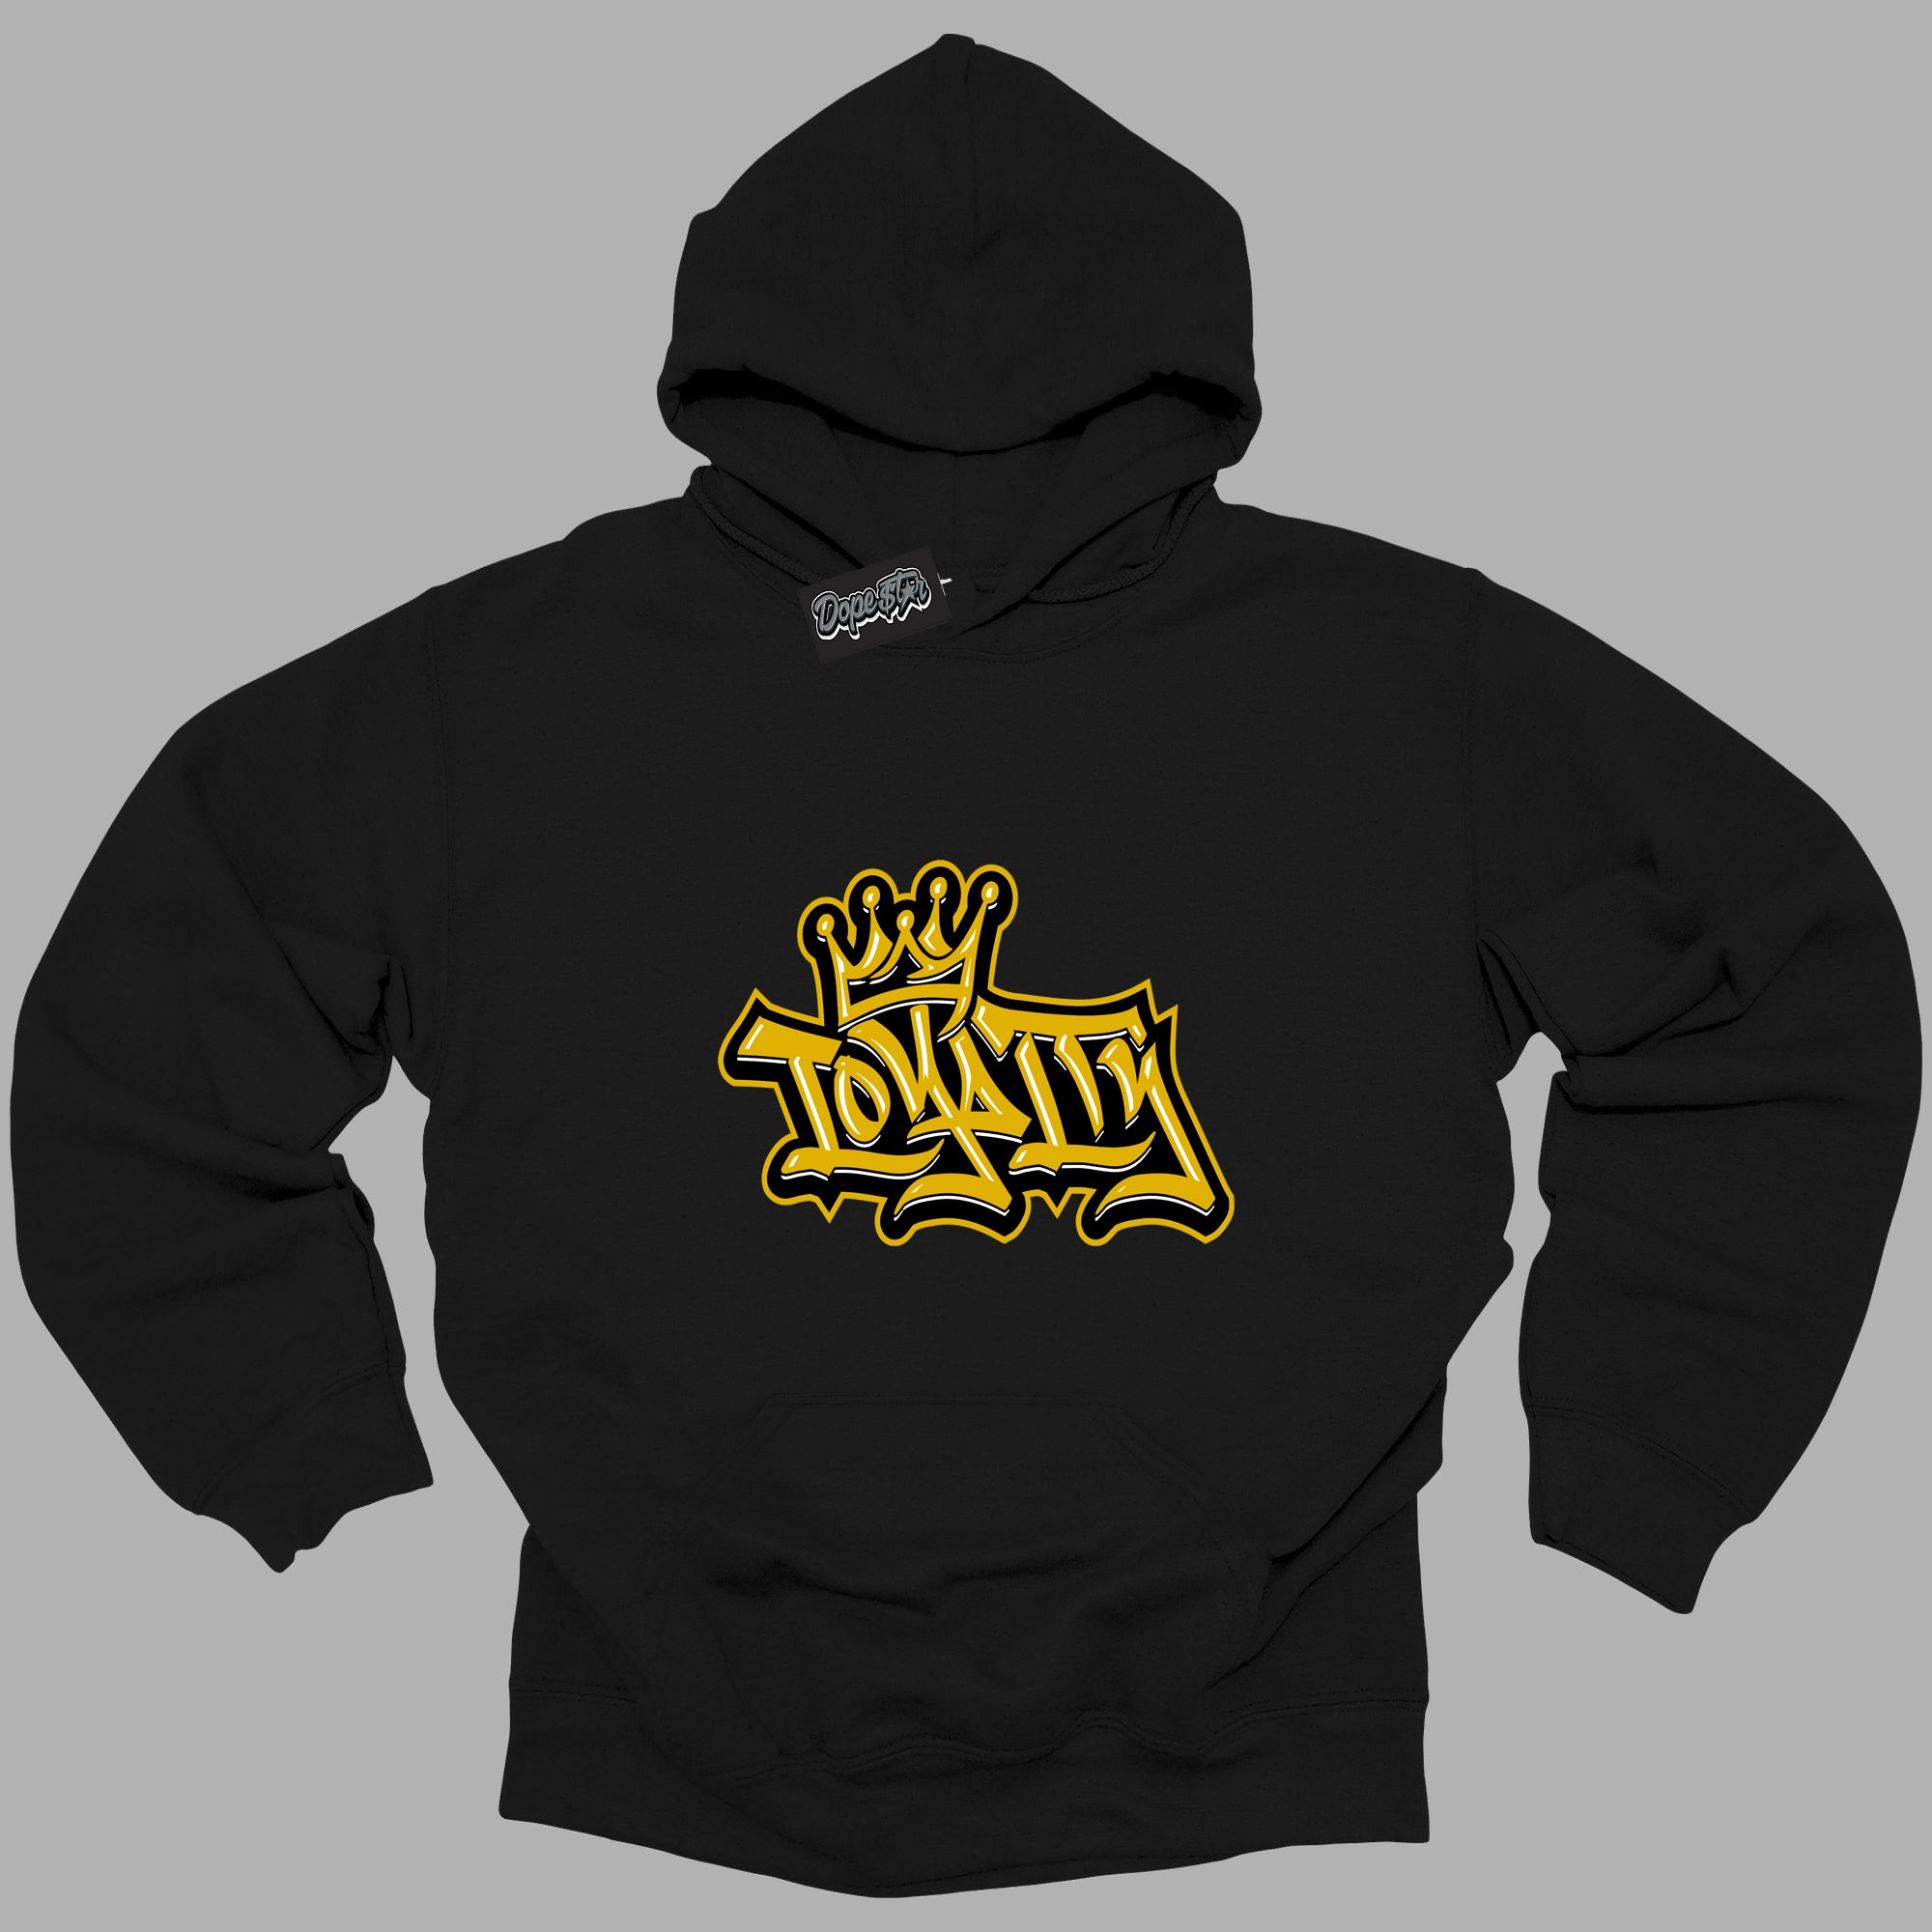 Cool Black Hoodie with “ Loyalty Crown ”  design that Perfectly Matches Yellow Ochre 6s Sneakers.